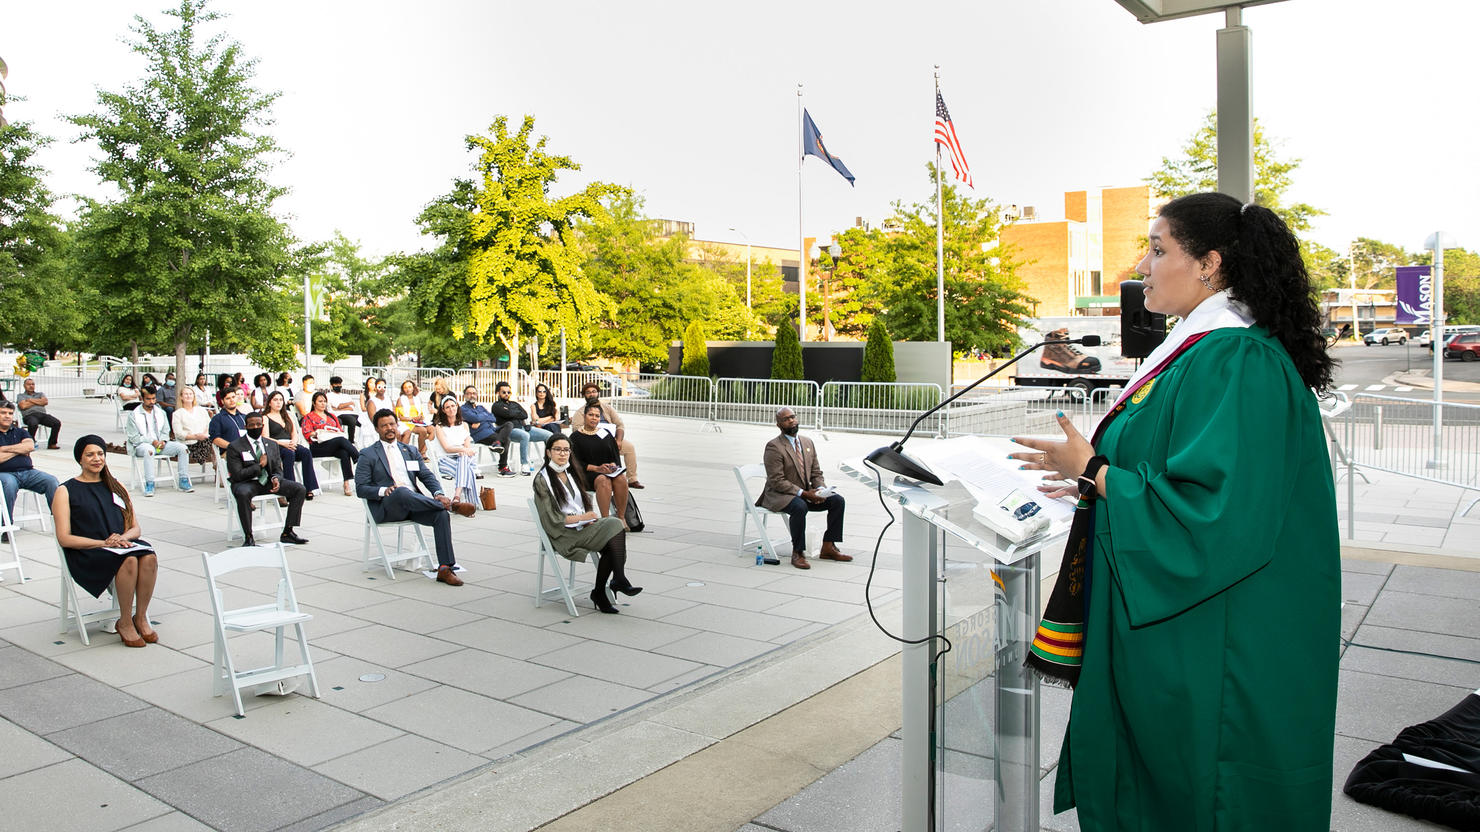 A socially distanced crowd of seated people on Mason Square's Plaza listen to a speaker in graduation robes.